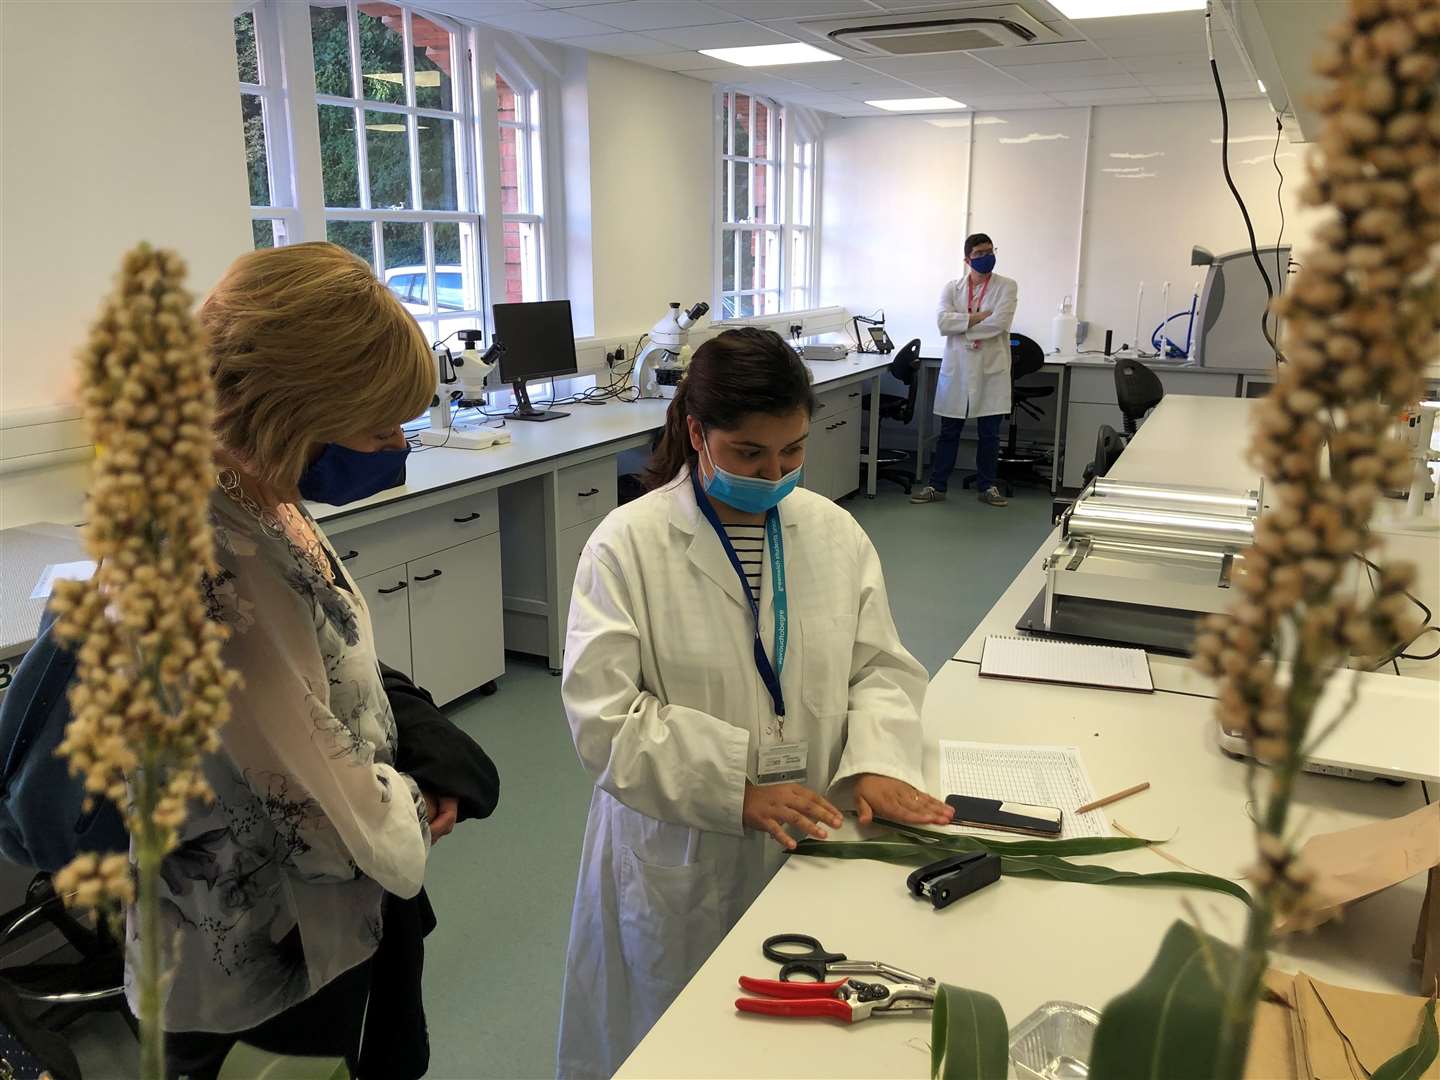 From left: Prof Jane Harrington watches as a student demonstrates how to use the new technology in agronomy lab. Picture: University of Greenwich (51513201)